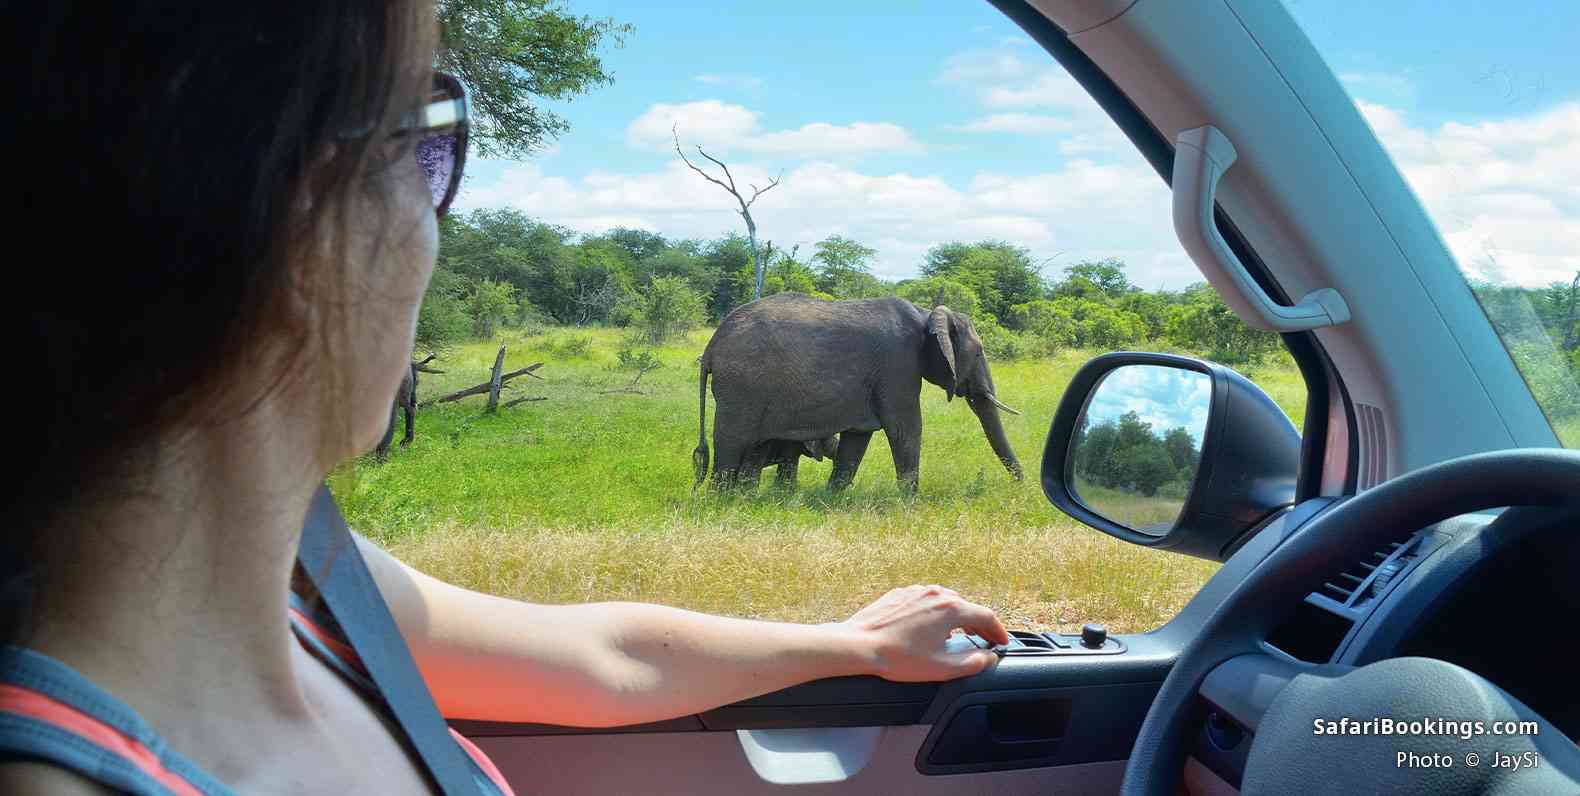 Watching elephants from a car in Kruger National Park